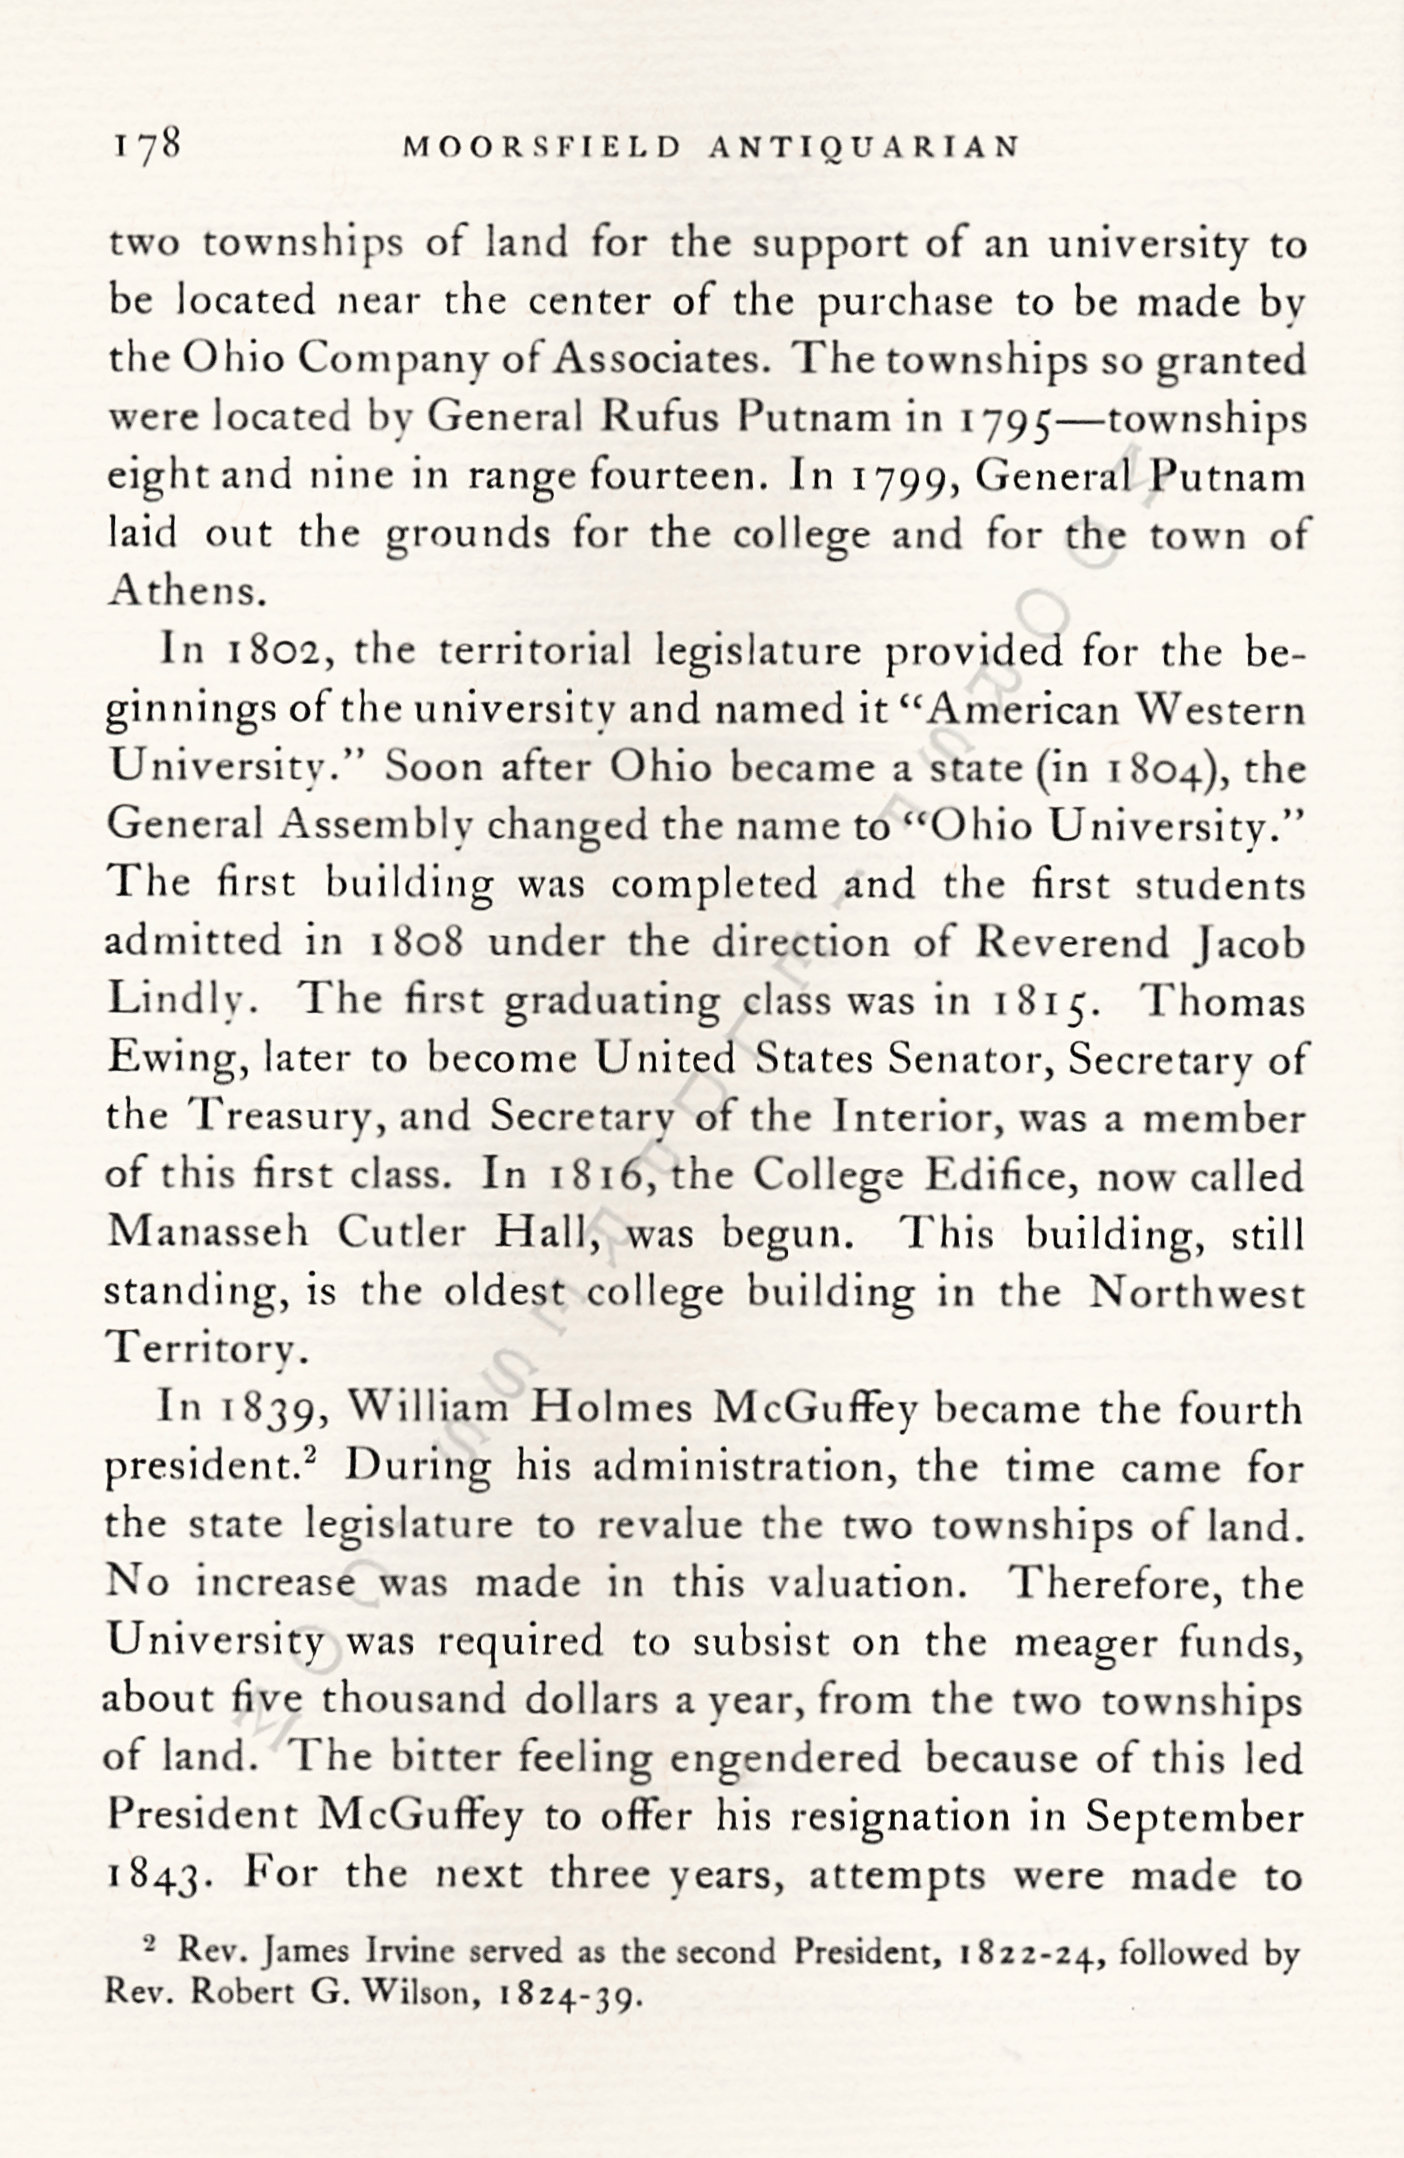 McGill
                      Papers-The Crisis at Ohio University Following the
                      Resignation of President McGuffey 1843-1848